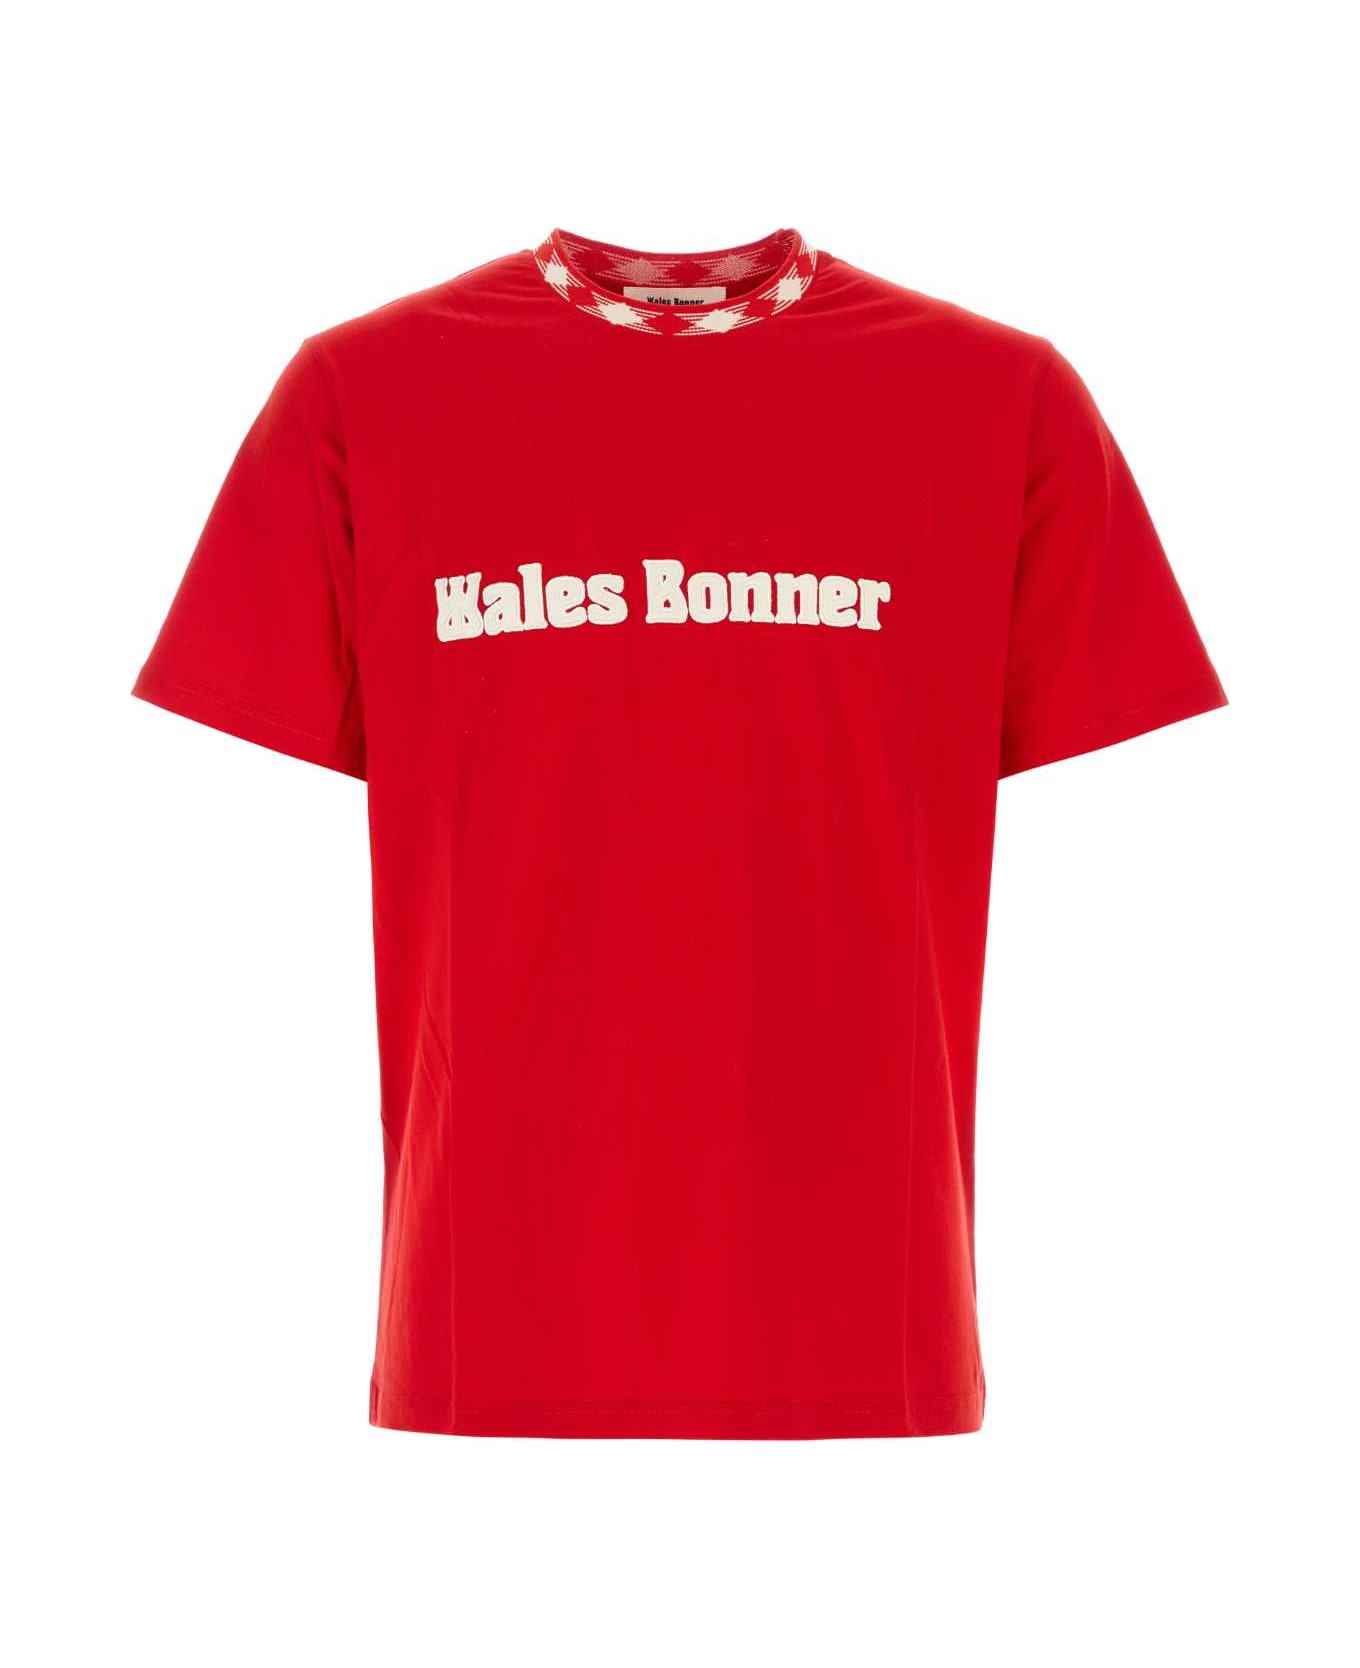 Wales Bonner Red Cotton Sorbonne 56 Oversize T-shirt - RED シャツ